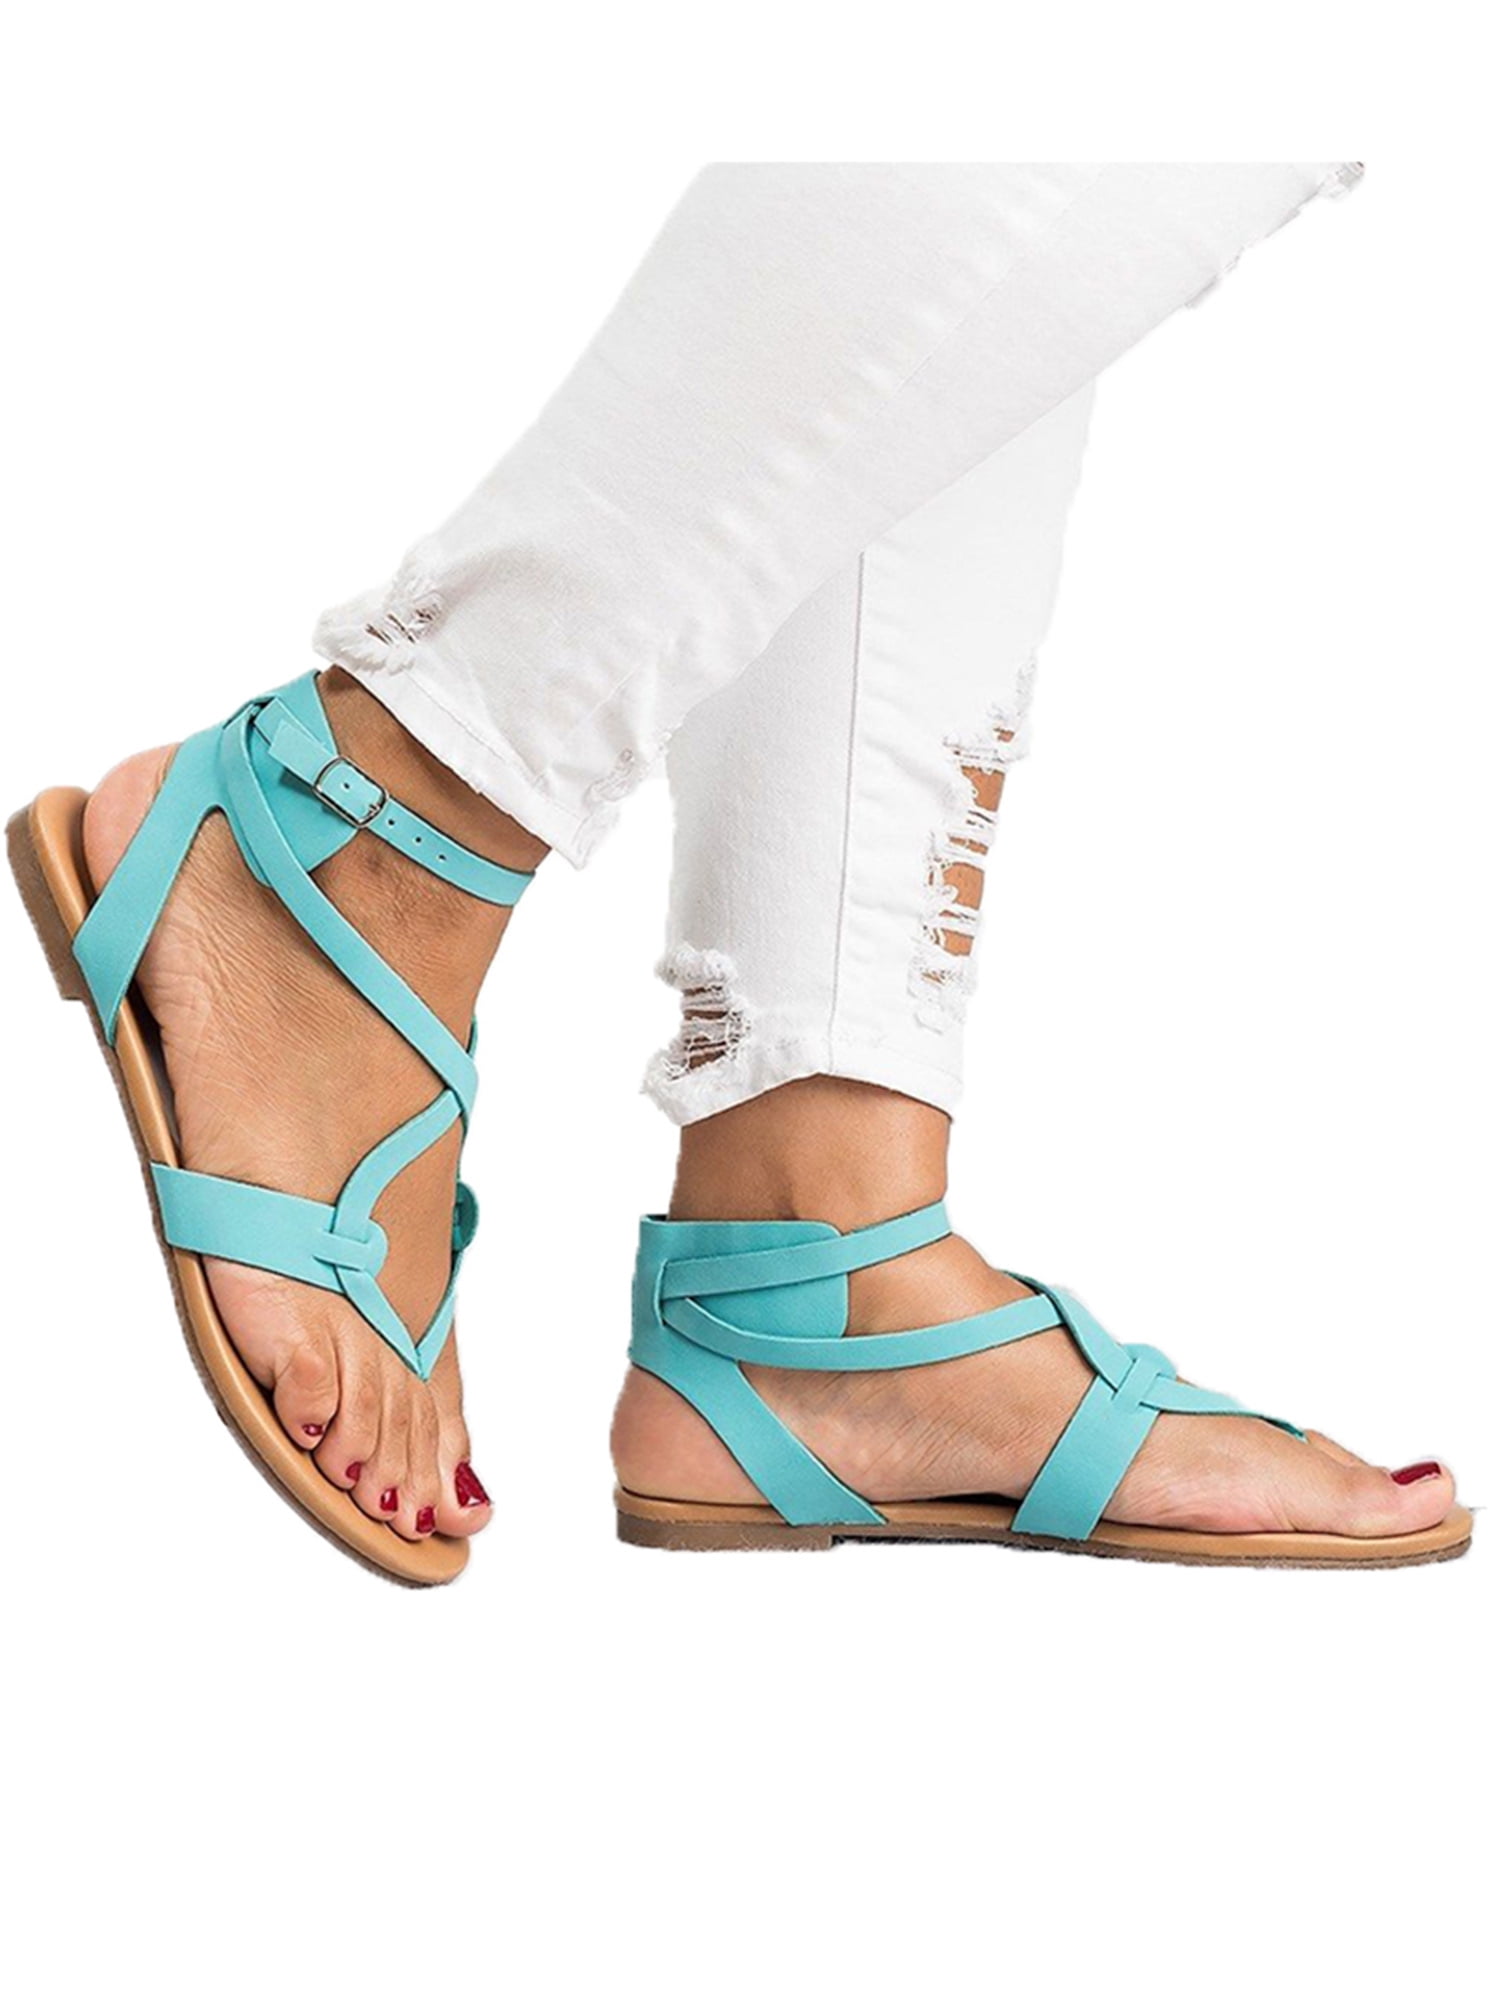 Tootu 2019 New Women Round Toe Breathable Lace-Up Sandals Rome Casual Flat Shoes